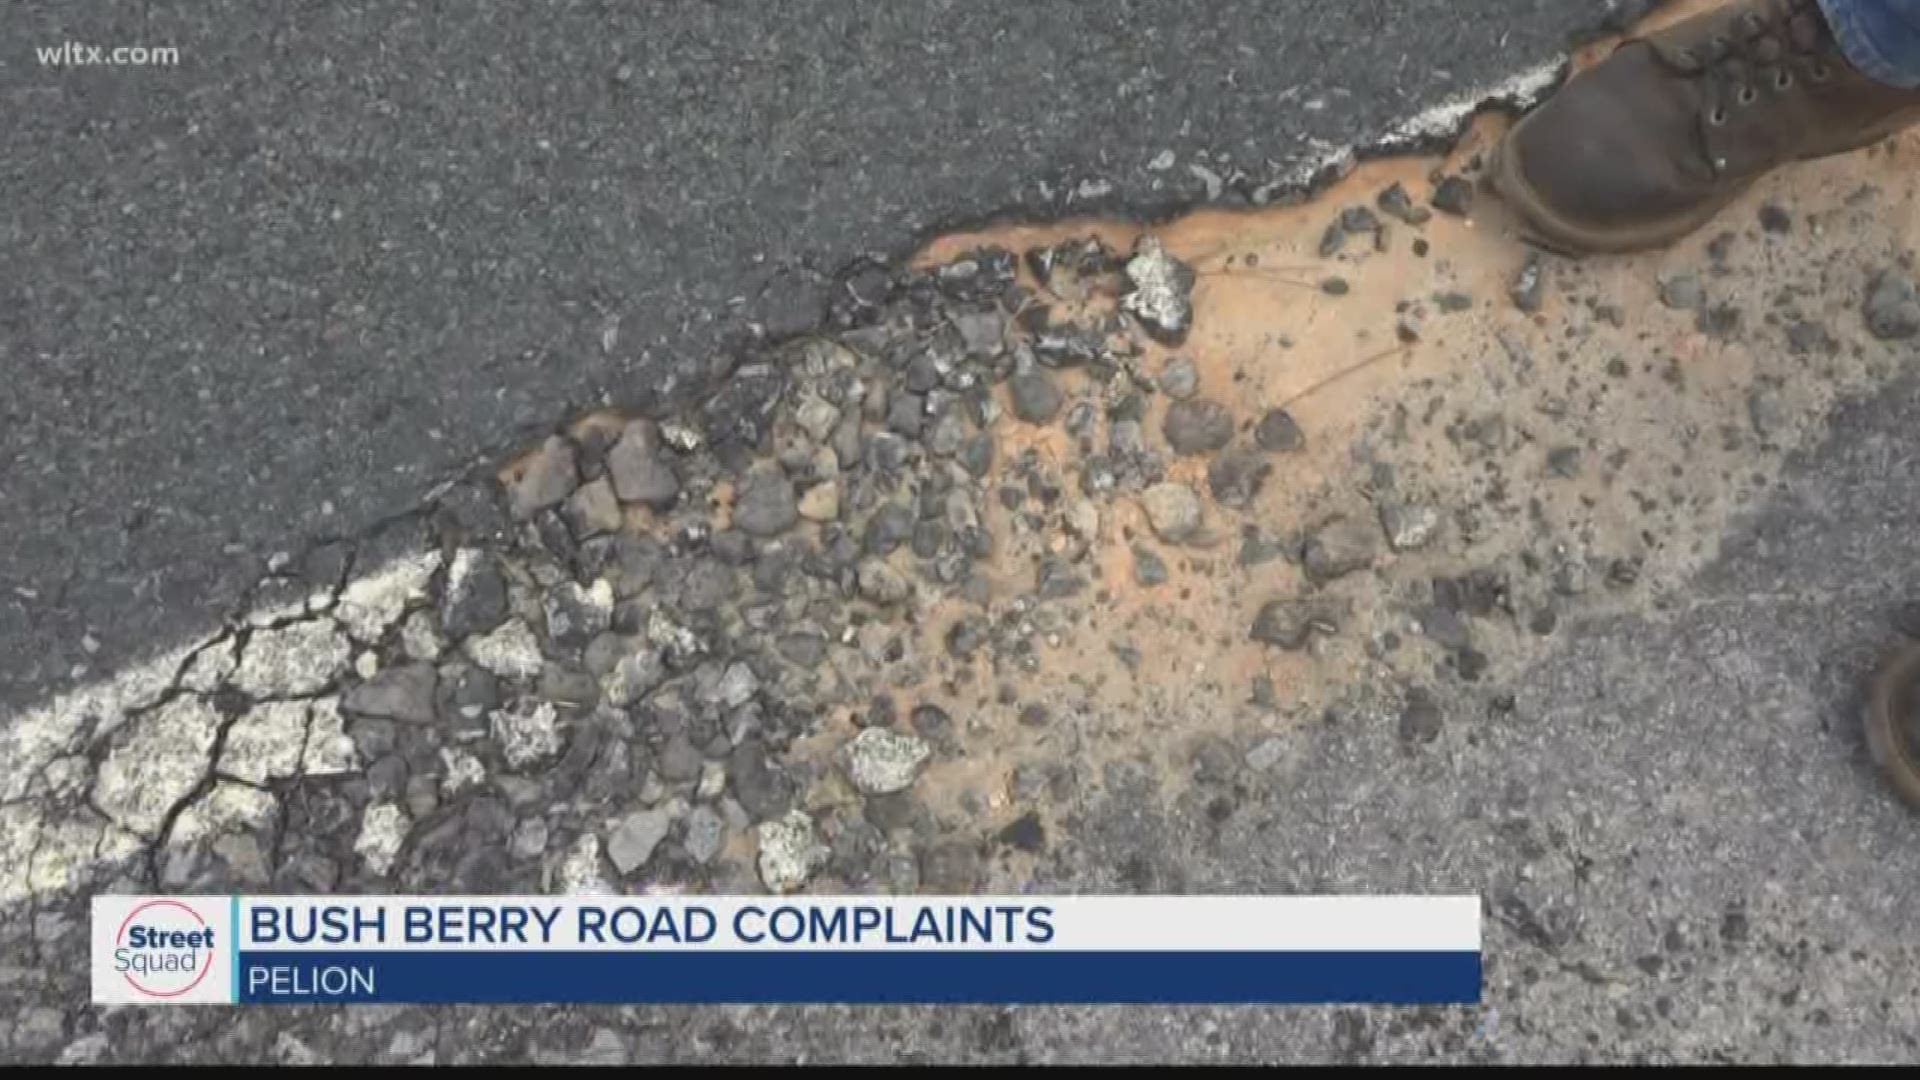 Residents on Bush Berry road in Pelion are not happy about the condition of the road